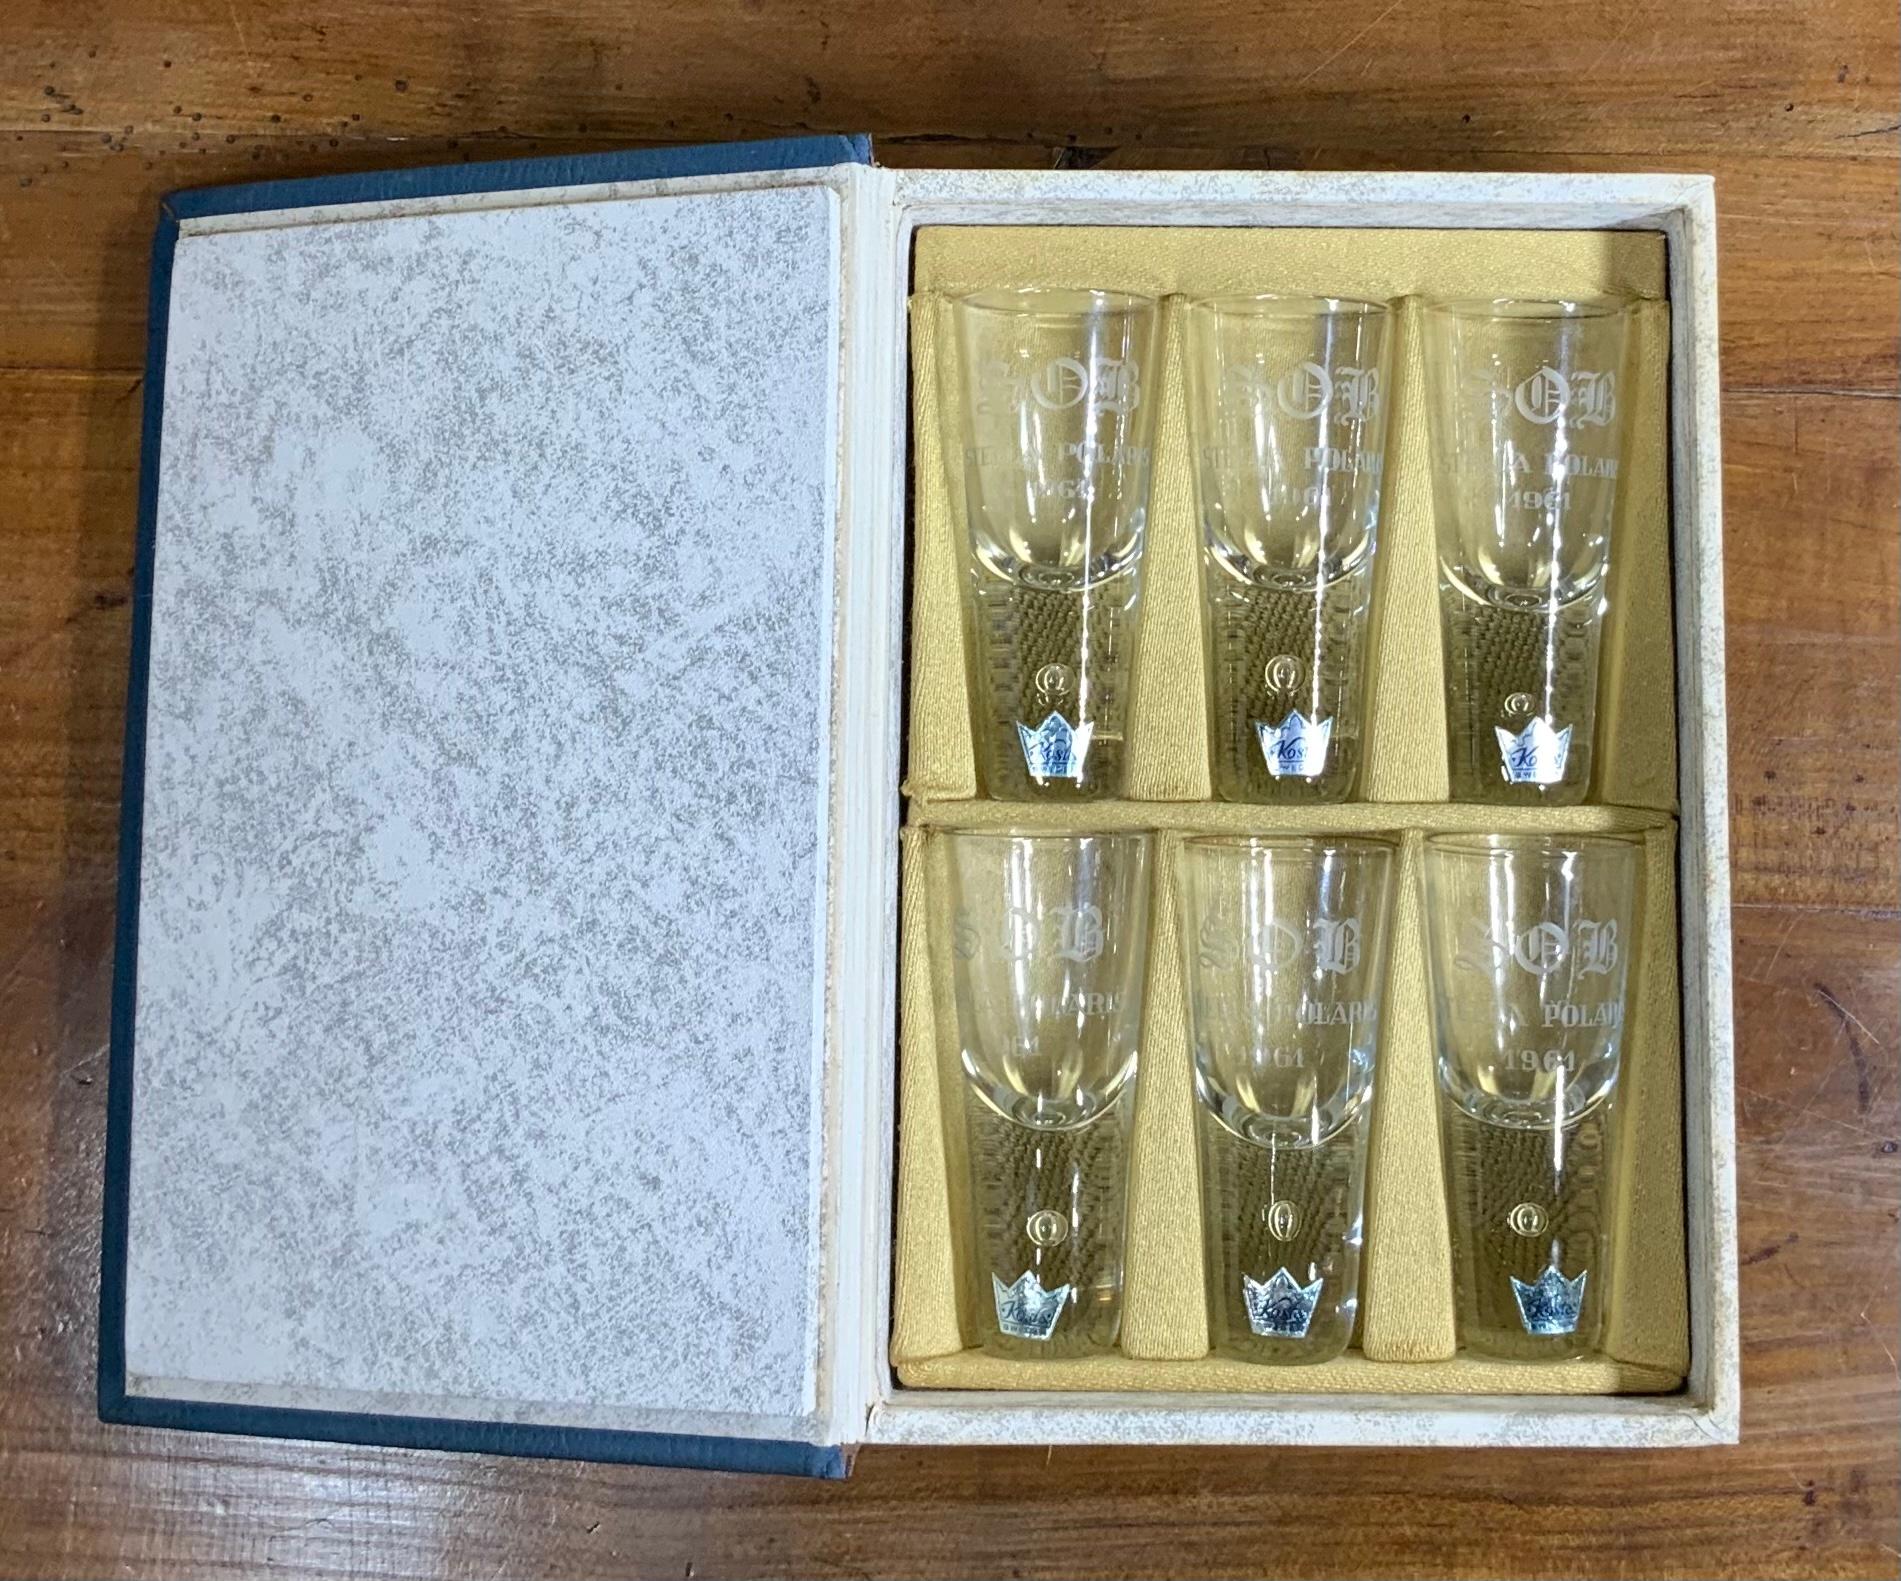 Beautiful six vodka shot glasses made by Stella Polaris Sweden maker 1961 .
Very good condition come with the original book box.
Box size is: 9.”25 x 6.”5 x 2.”5.